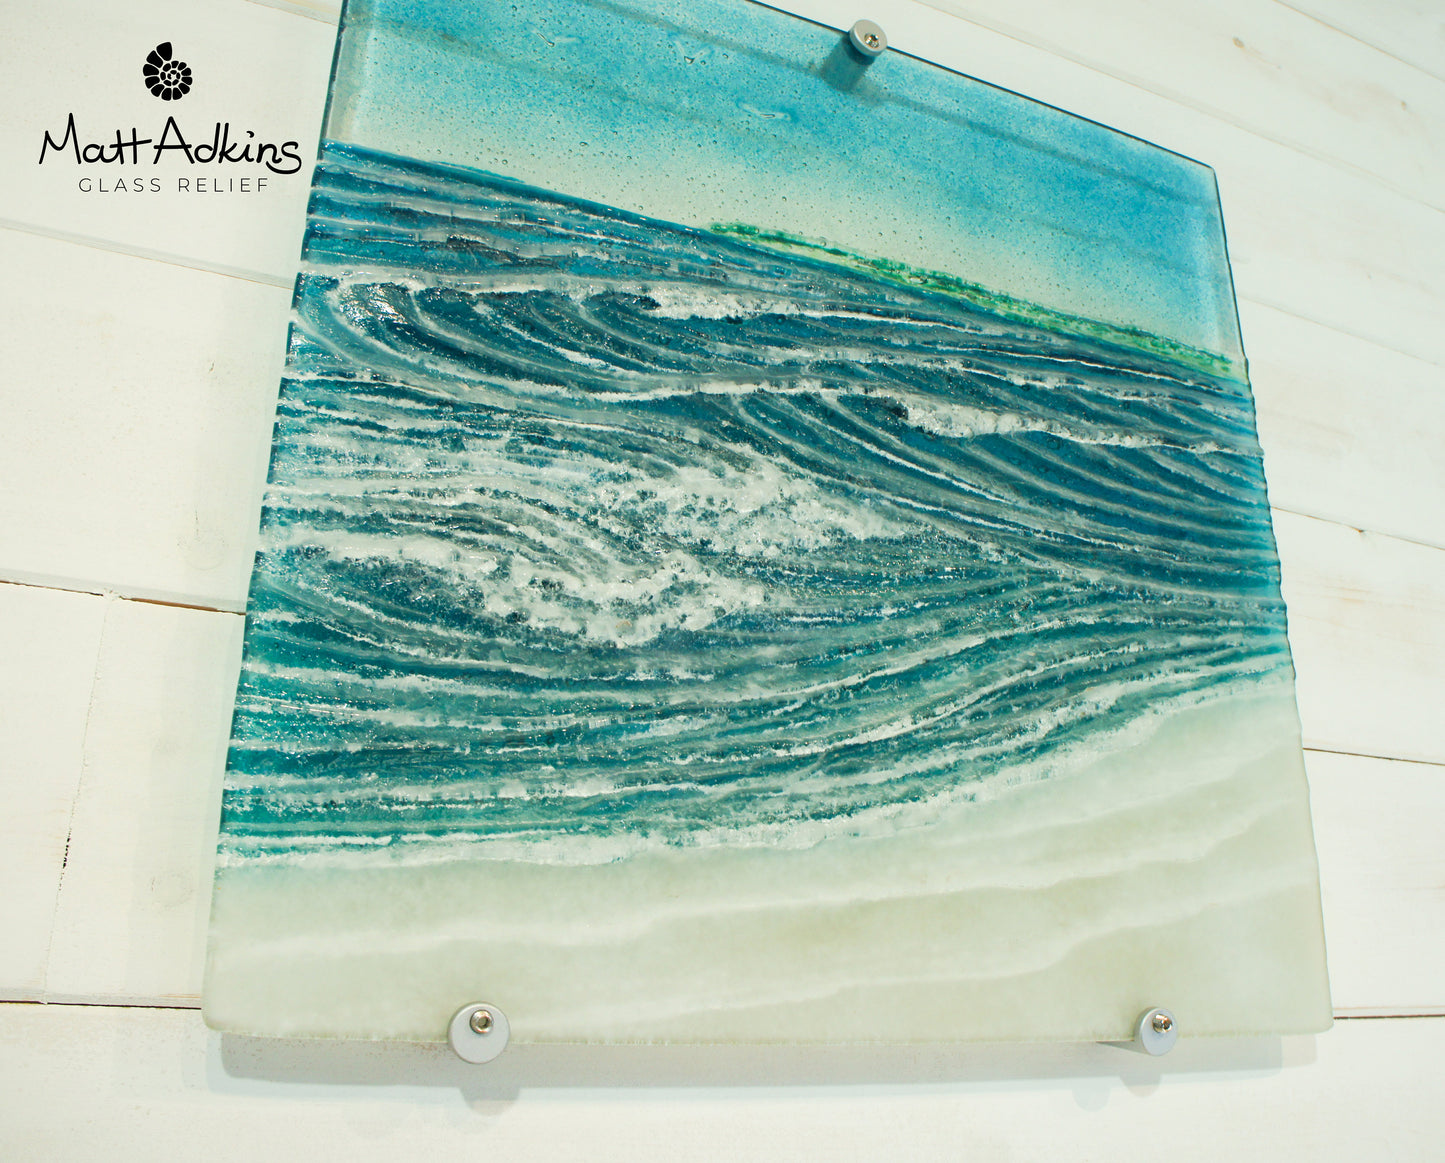 Coastal Wave Panel with Land - Large - 40x40cm (16"x16") with fixings